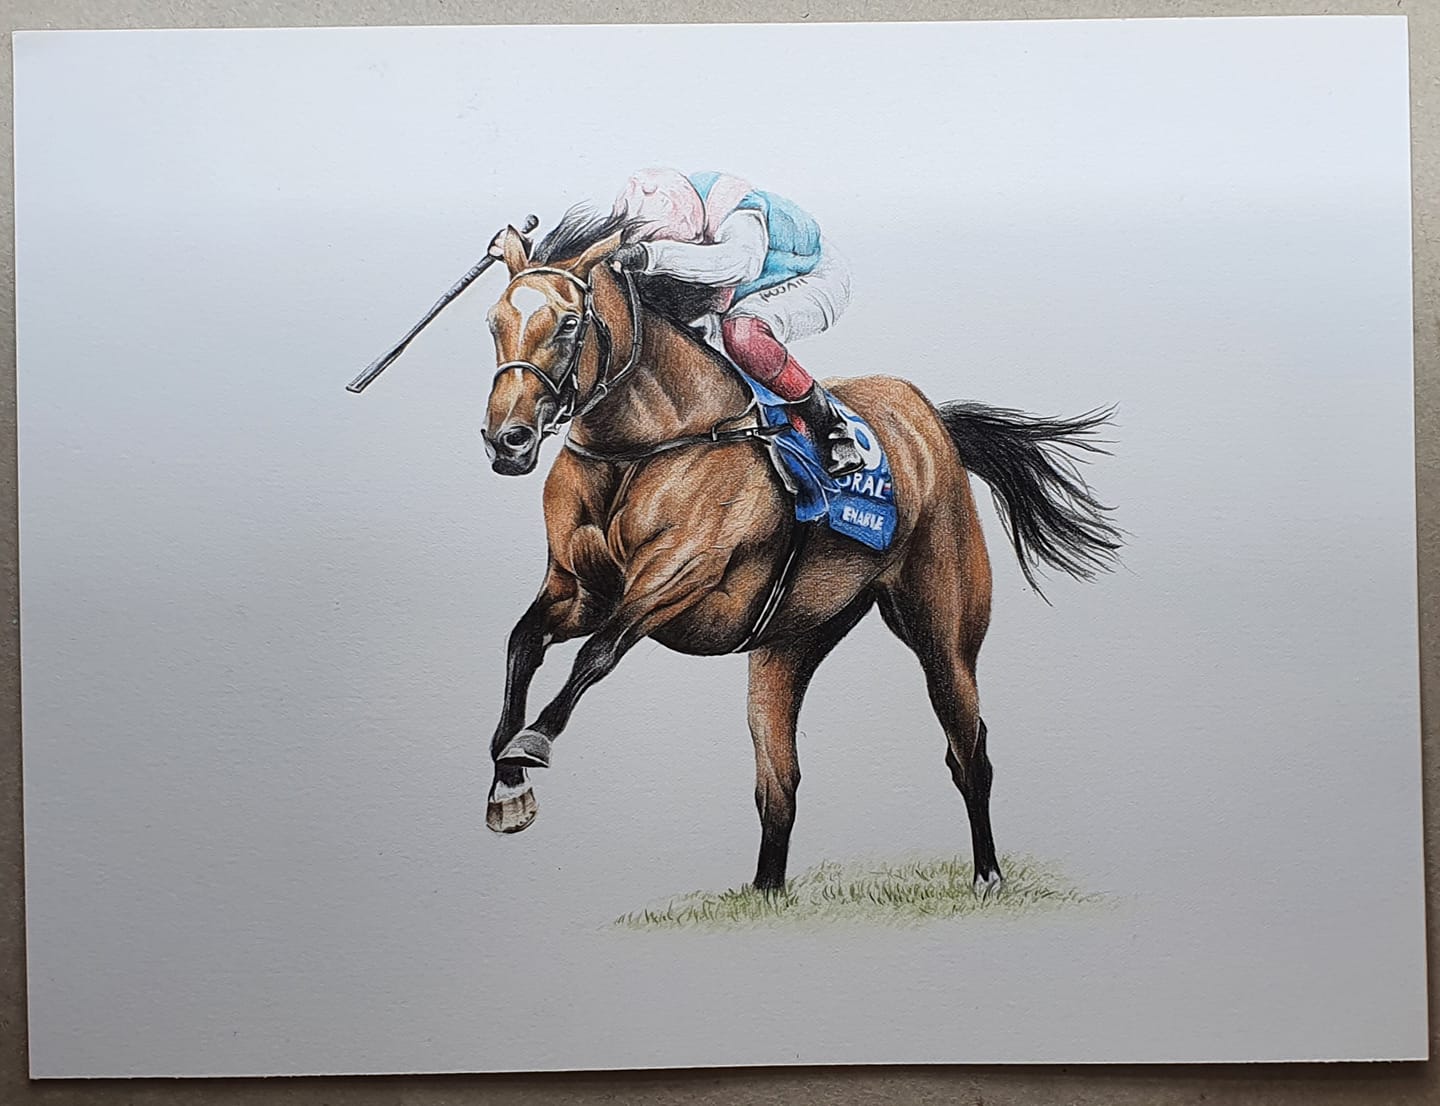 ENABLE - 40cmx30cm coloured pencil drawing of the unbeaten flat mare enable